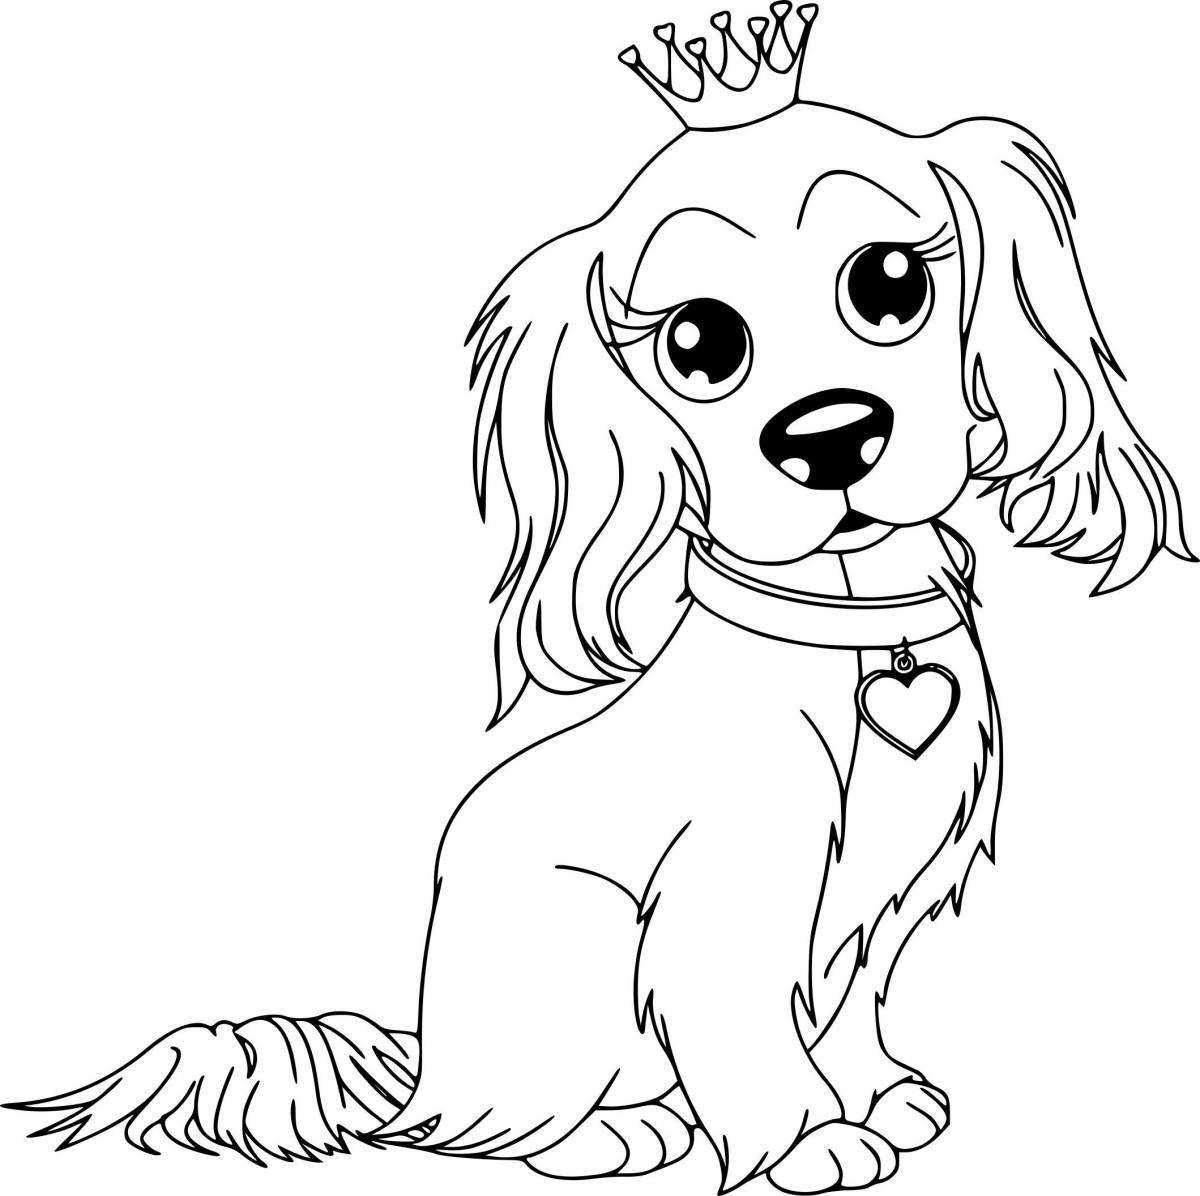 Fluffy puppies coloring pages